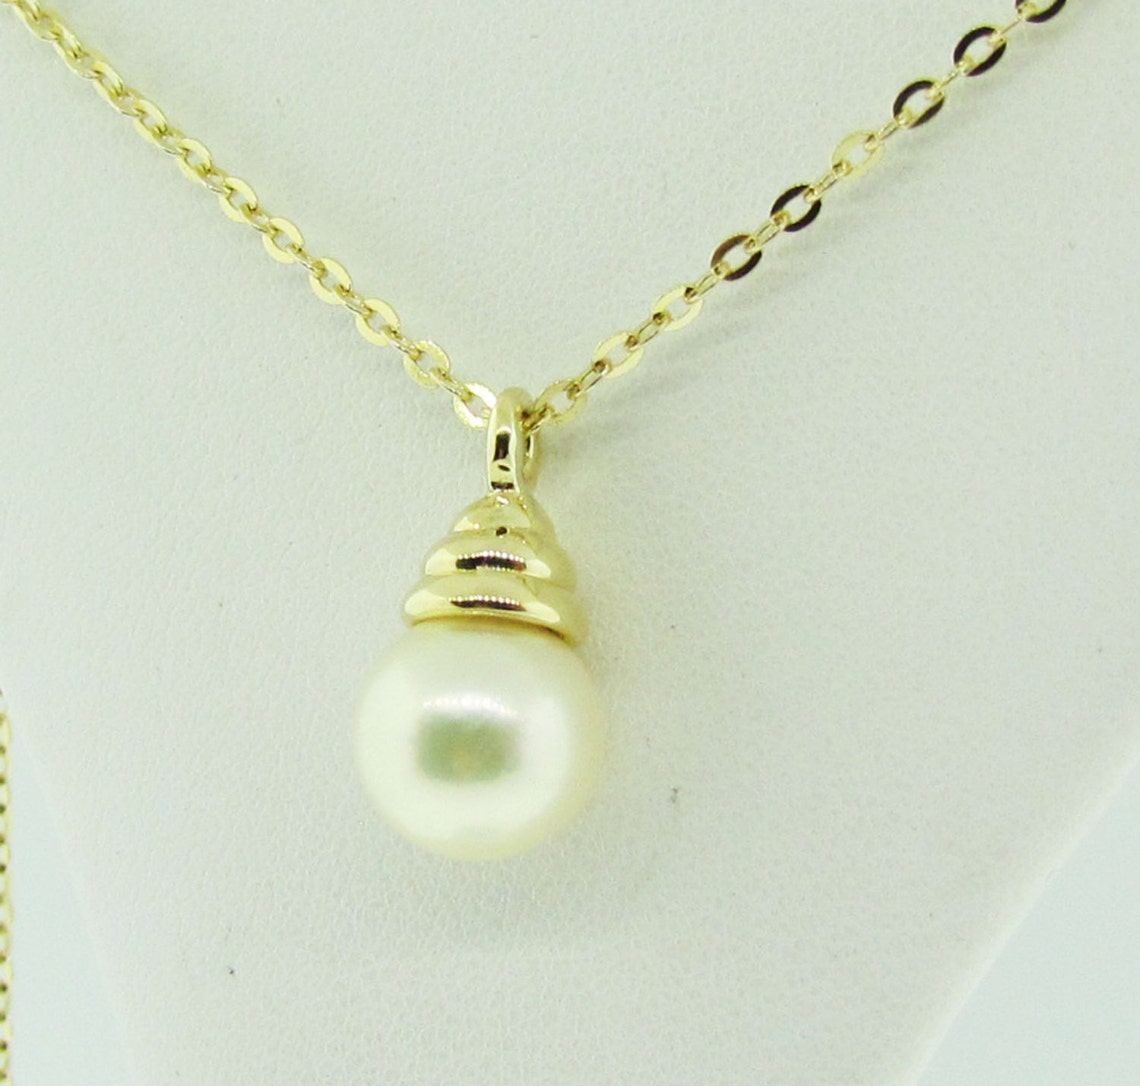 Made in Italy. Gold and 9 Mm White Pearl Pendant. Estate. - Etsy